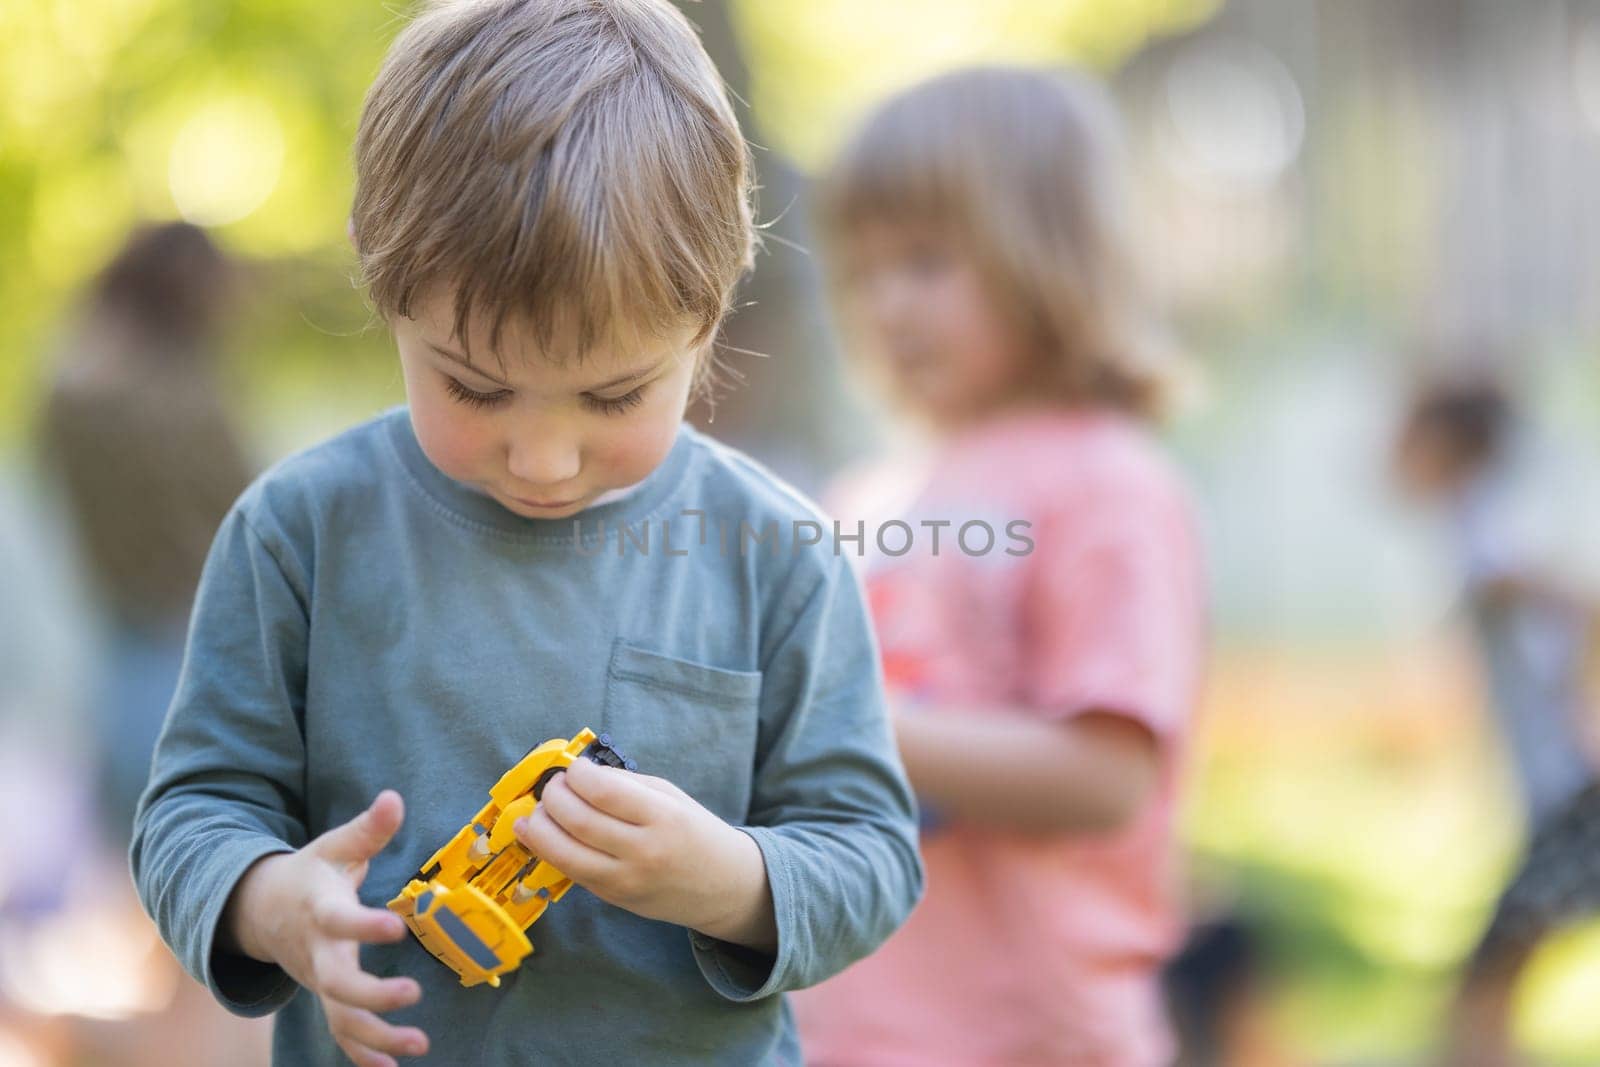 A boy is holding a toy car in his hand by Studia72